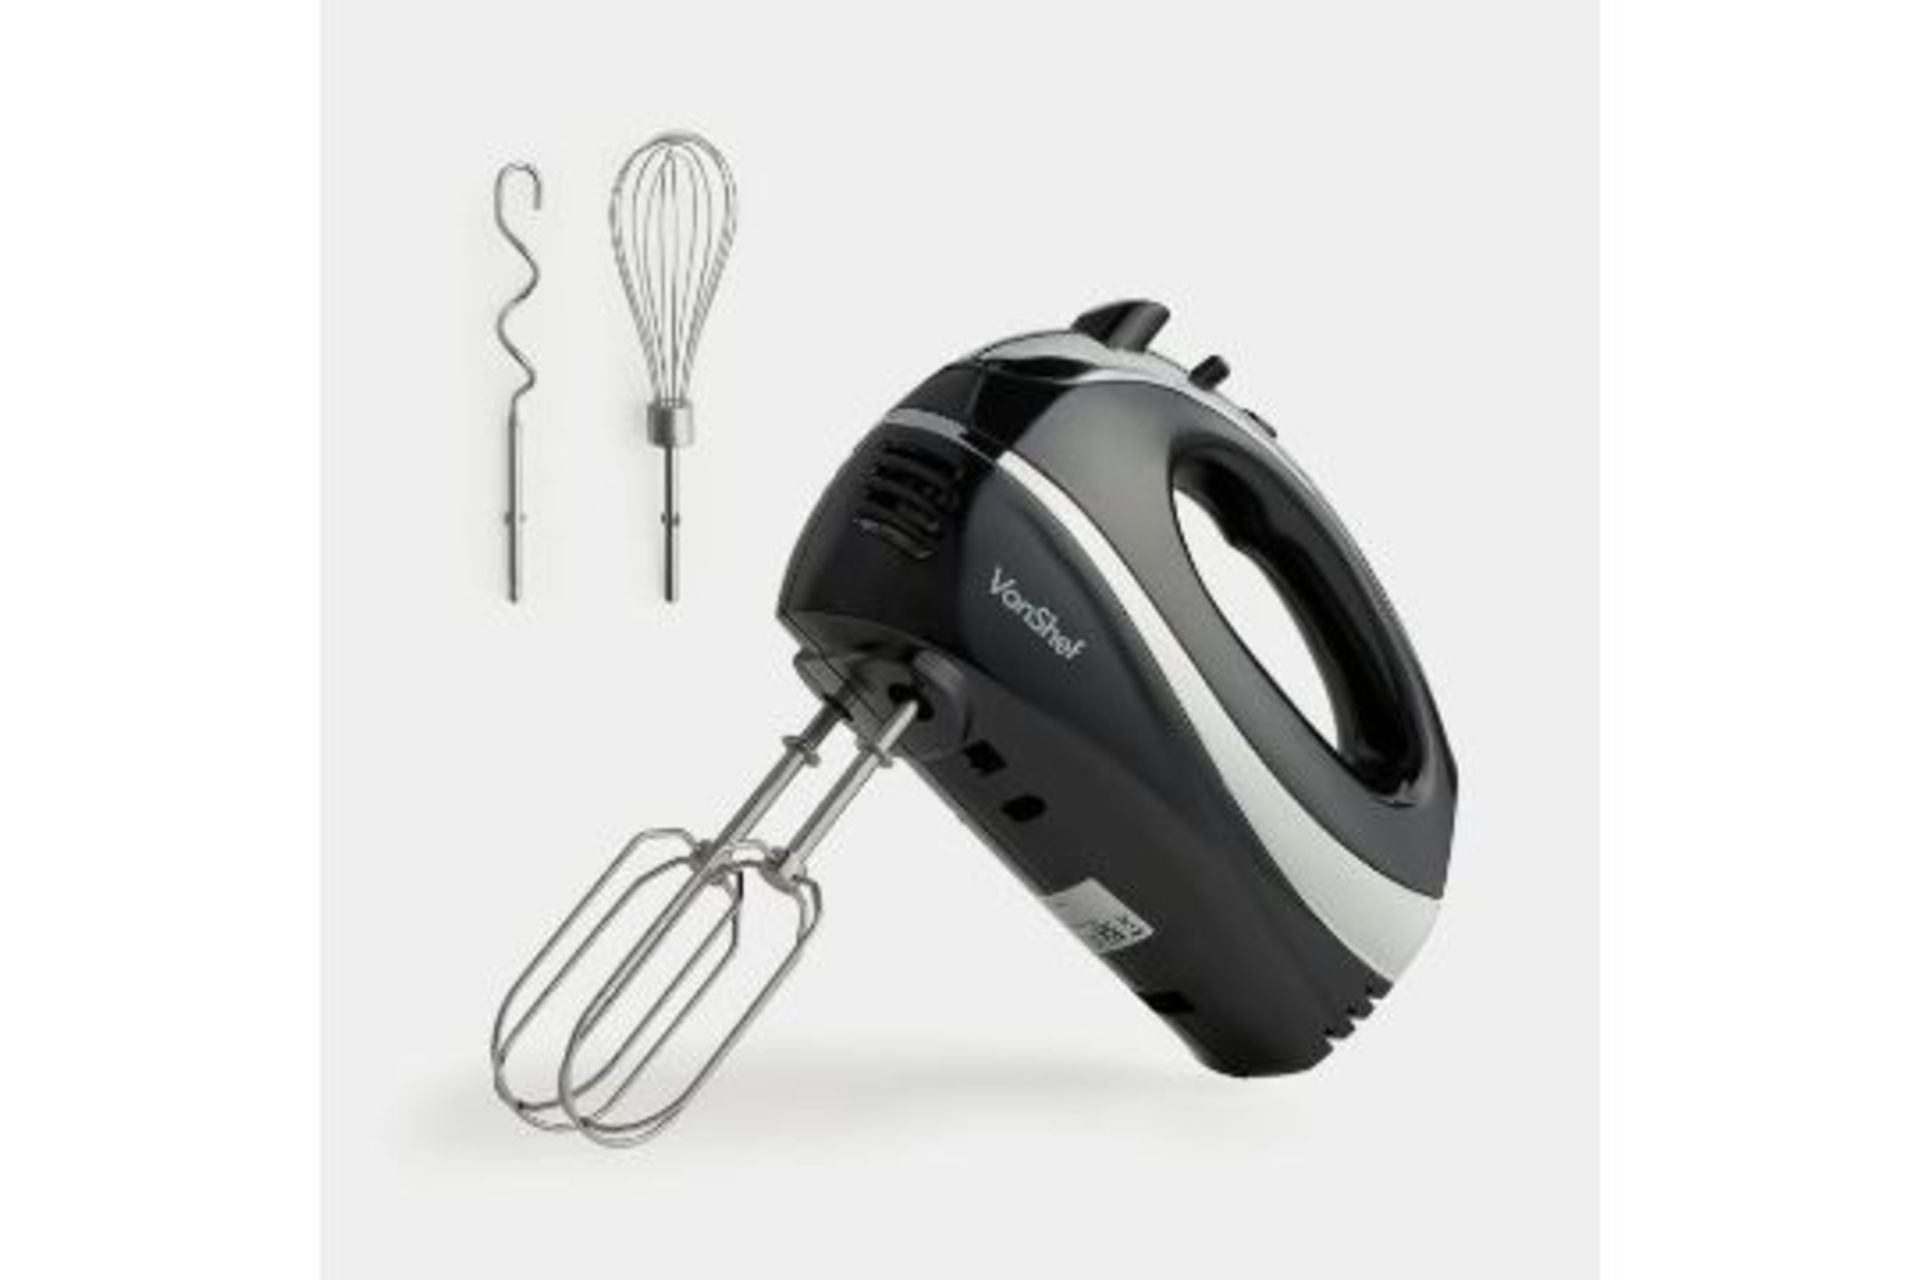 300W Hand Mixer - Black. - PW. This is the ultimate kitchen appliance if you love baking and